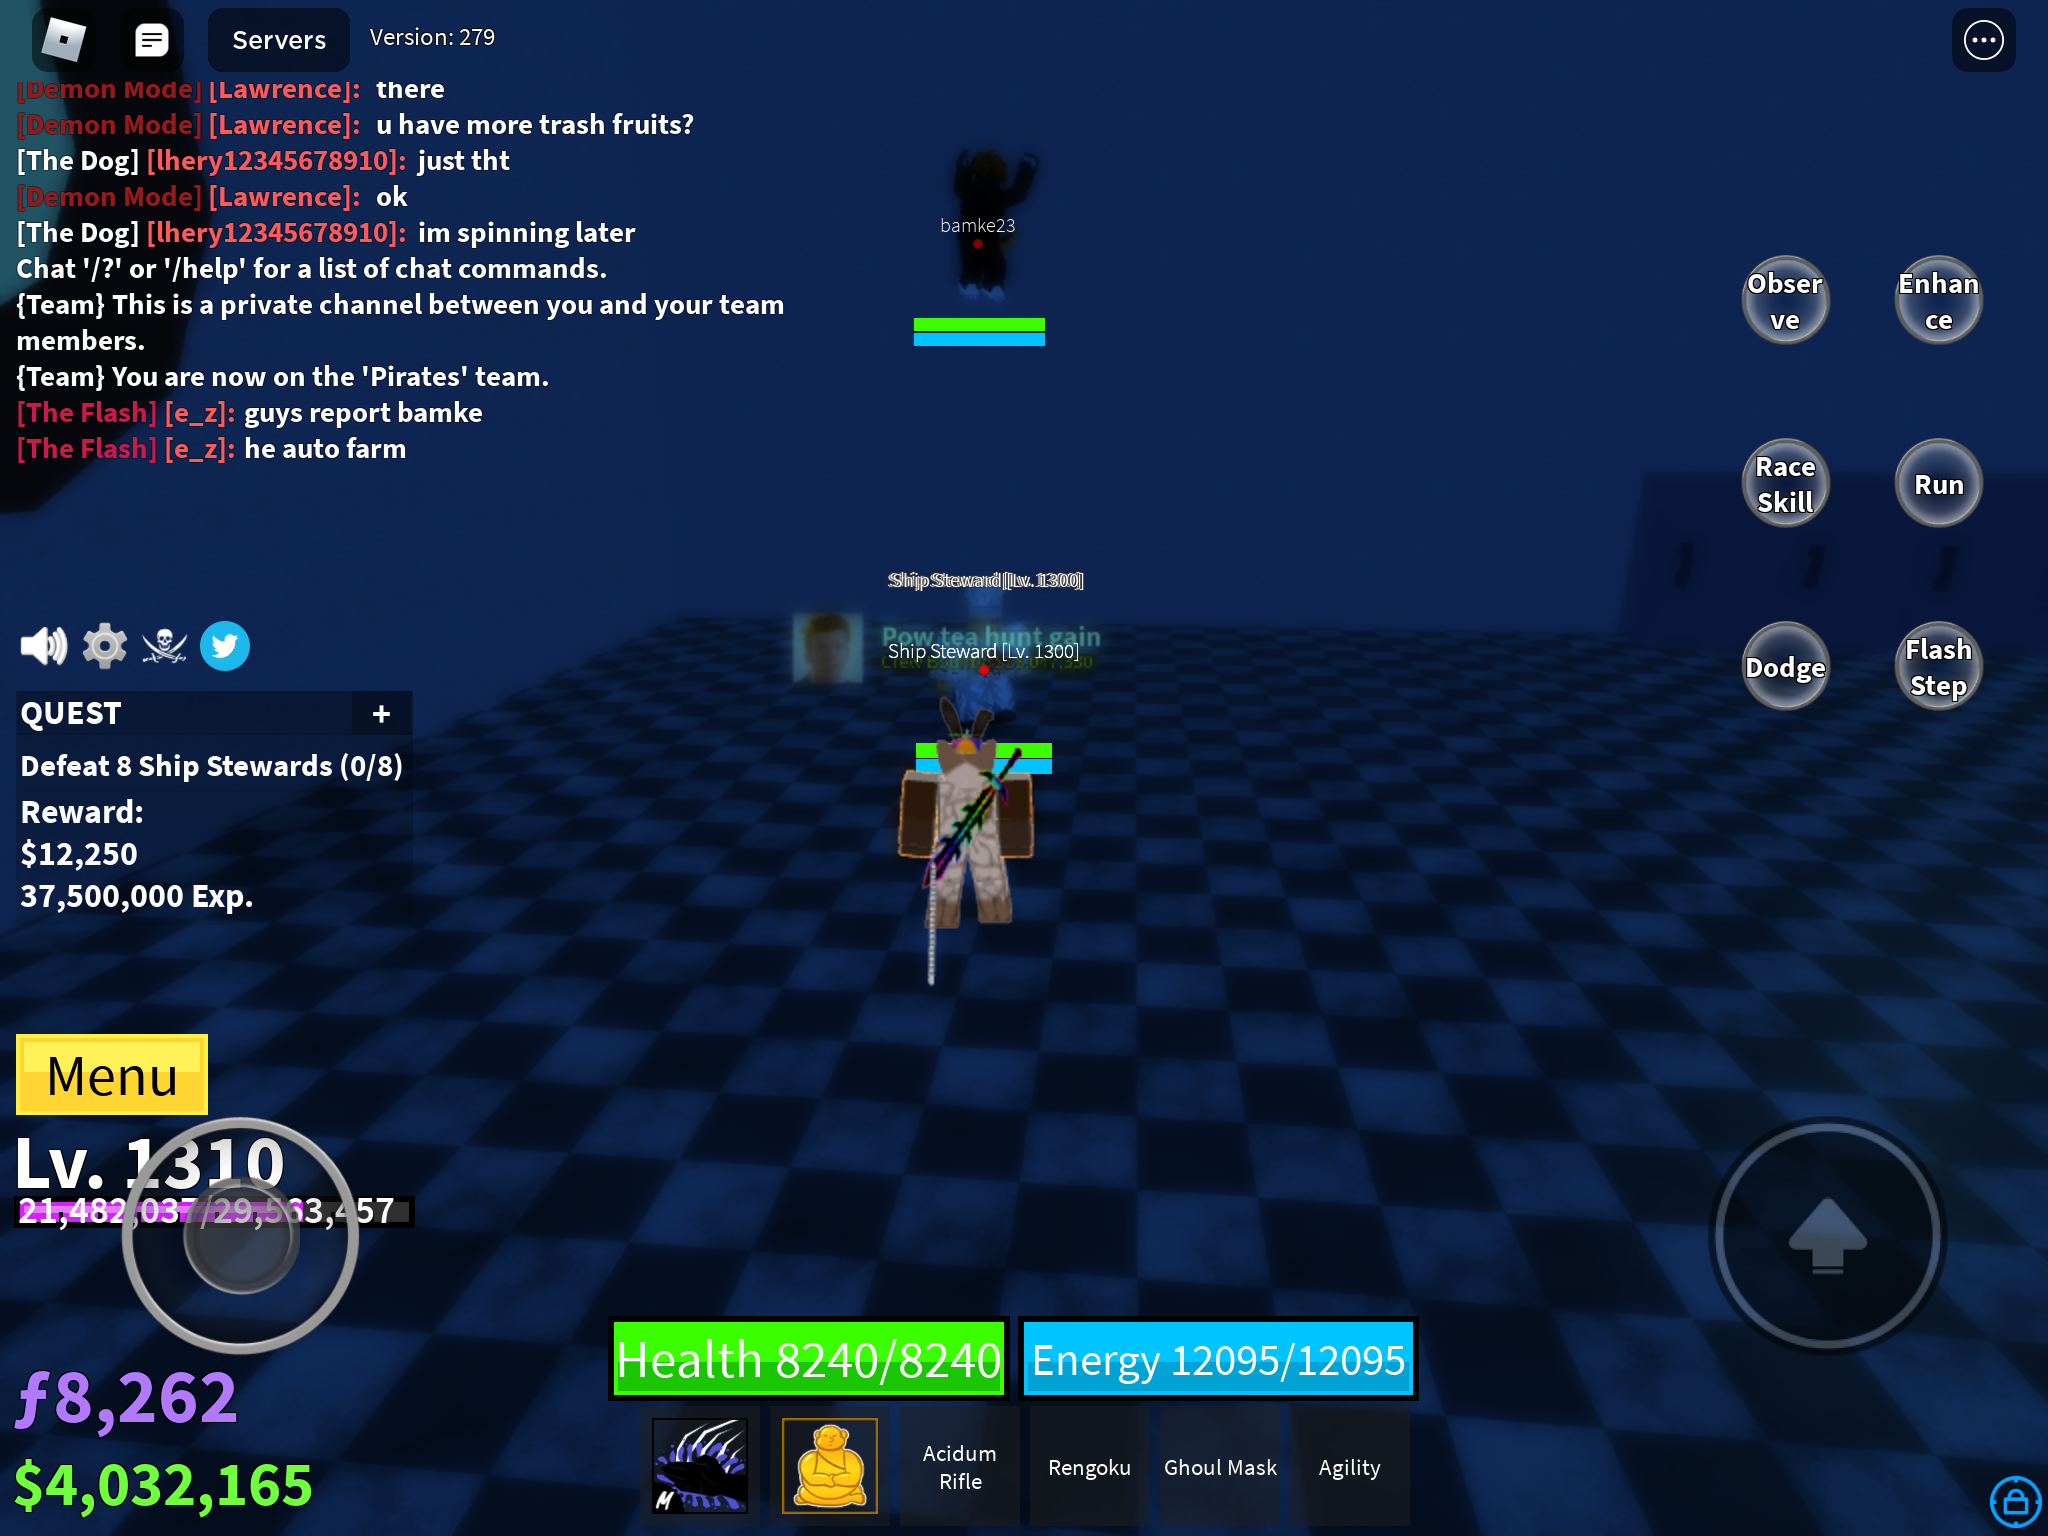 Blox Fruits FREE PRIVATE SERVER Method in ANY SEA! (JULY 2022